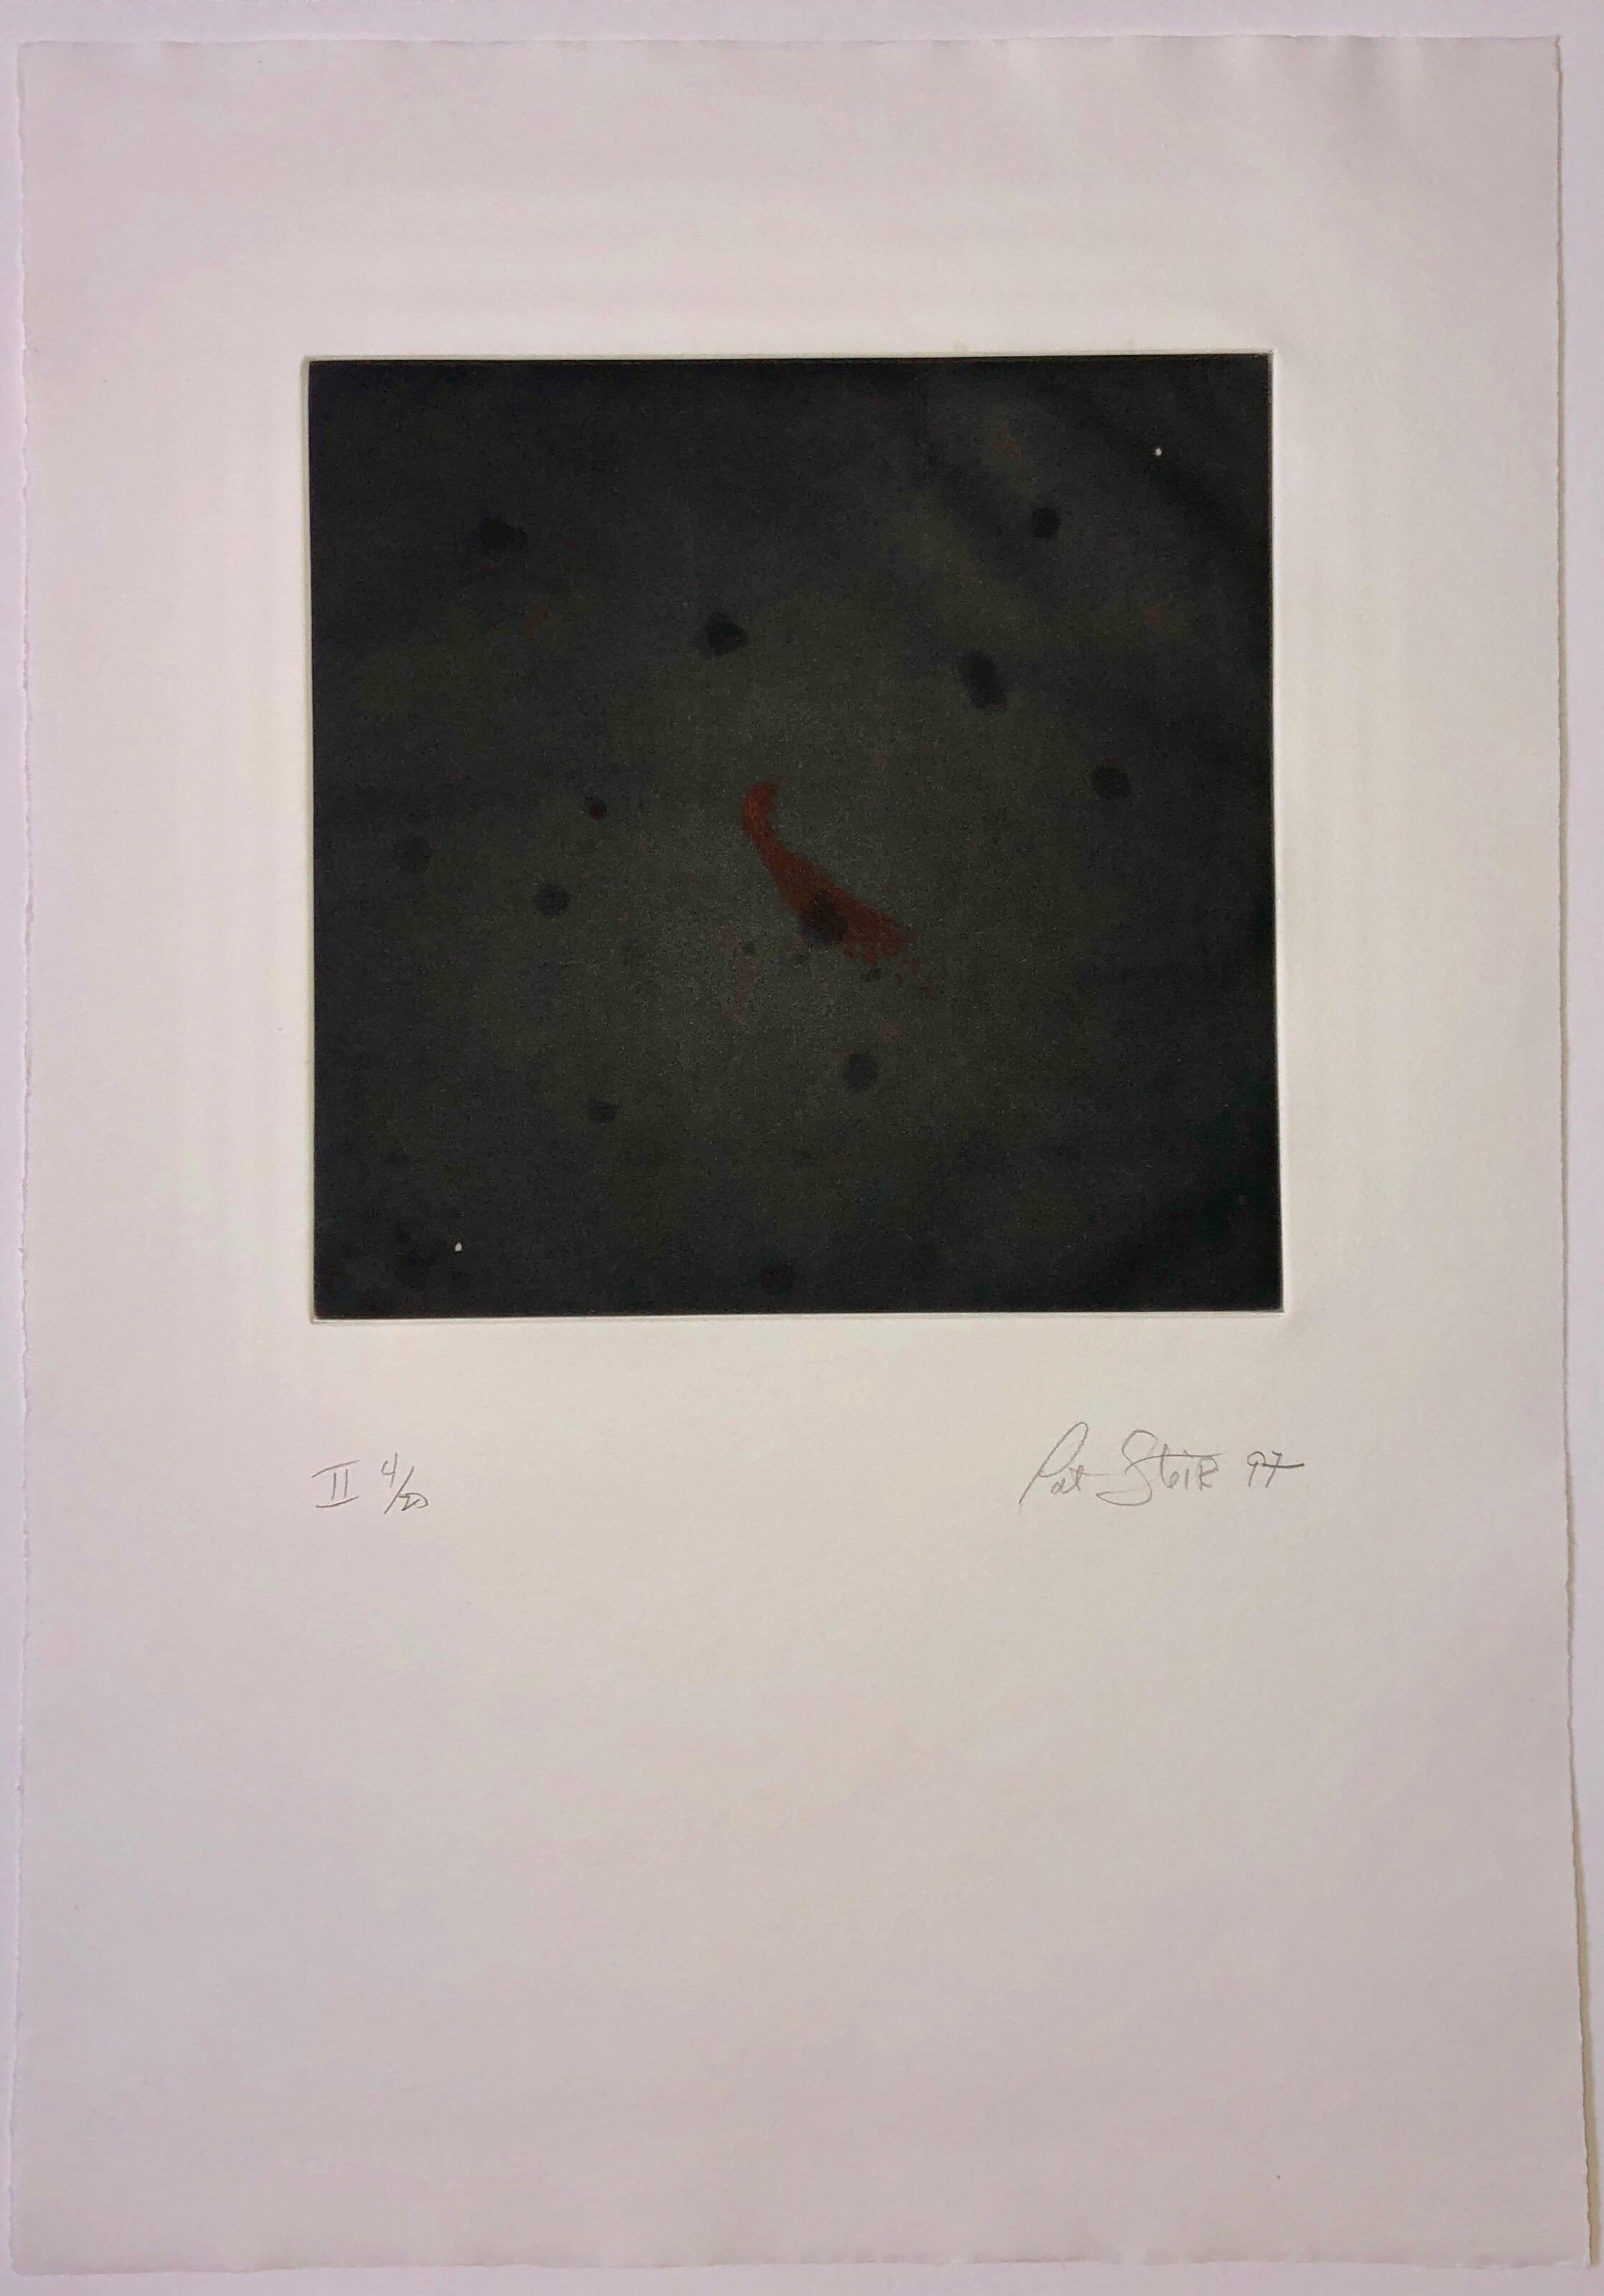 Comet, Outer Space Dark Series Aquatint Etching Color Abstract Expressionist  2